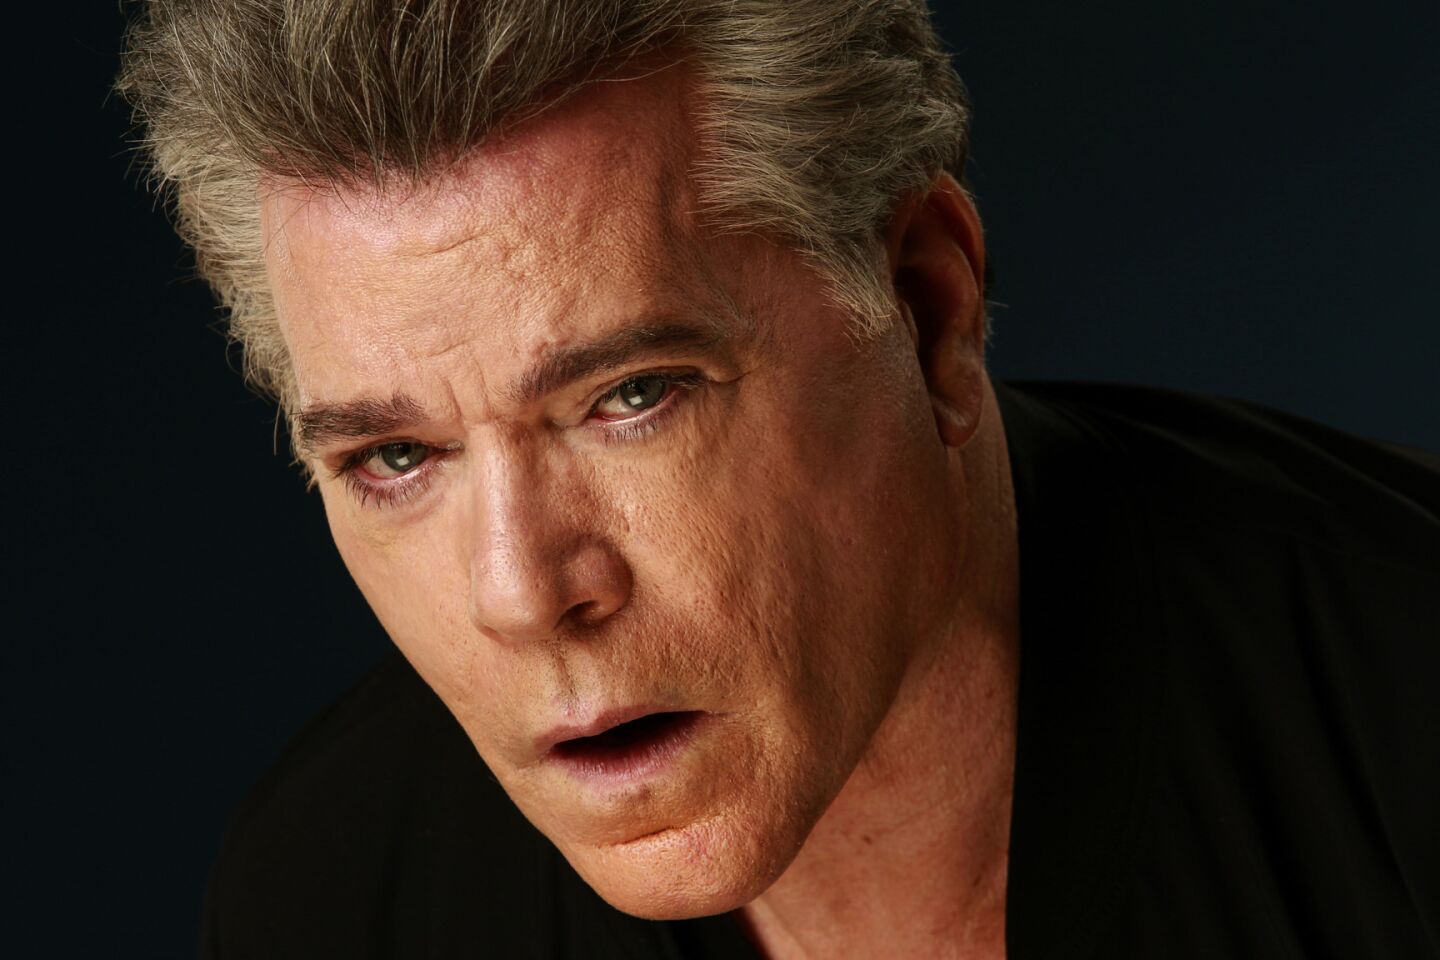 Celebrity portraits by The Times | Ray Liotta